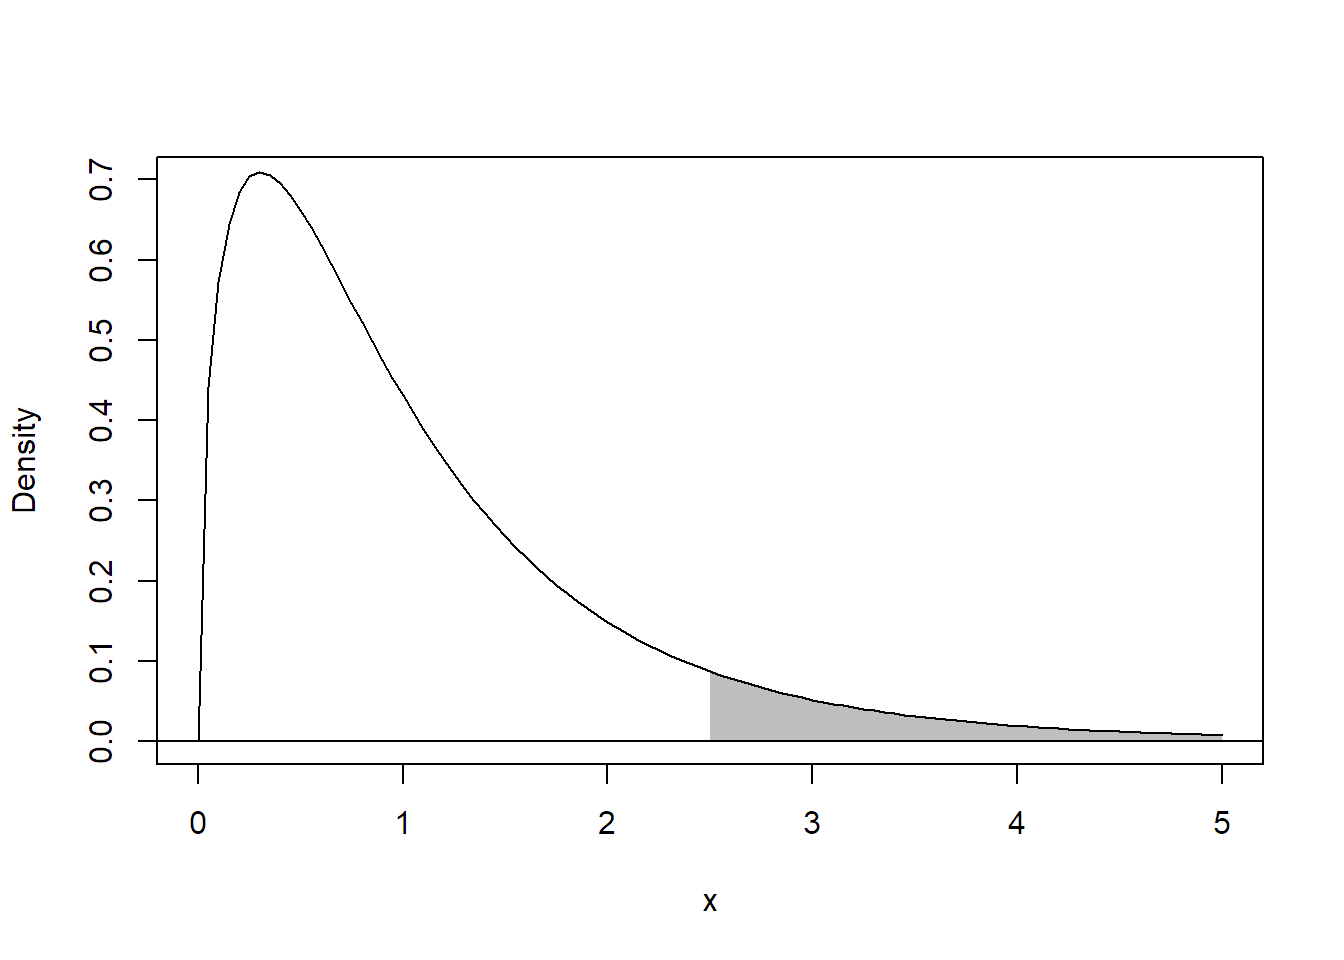 Illustration of the p-value (shaded area) for a realized $F$-ratio of 2.5.